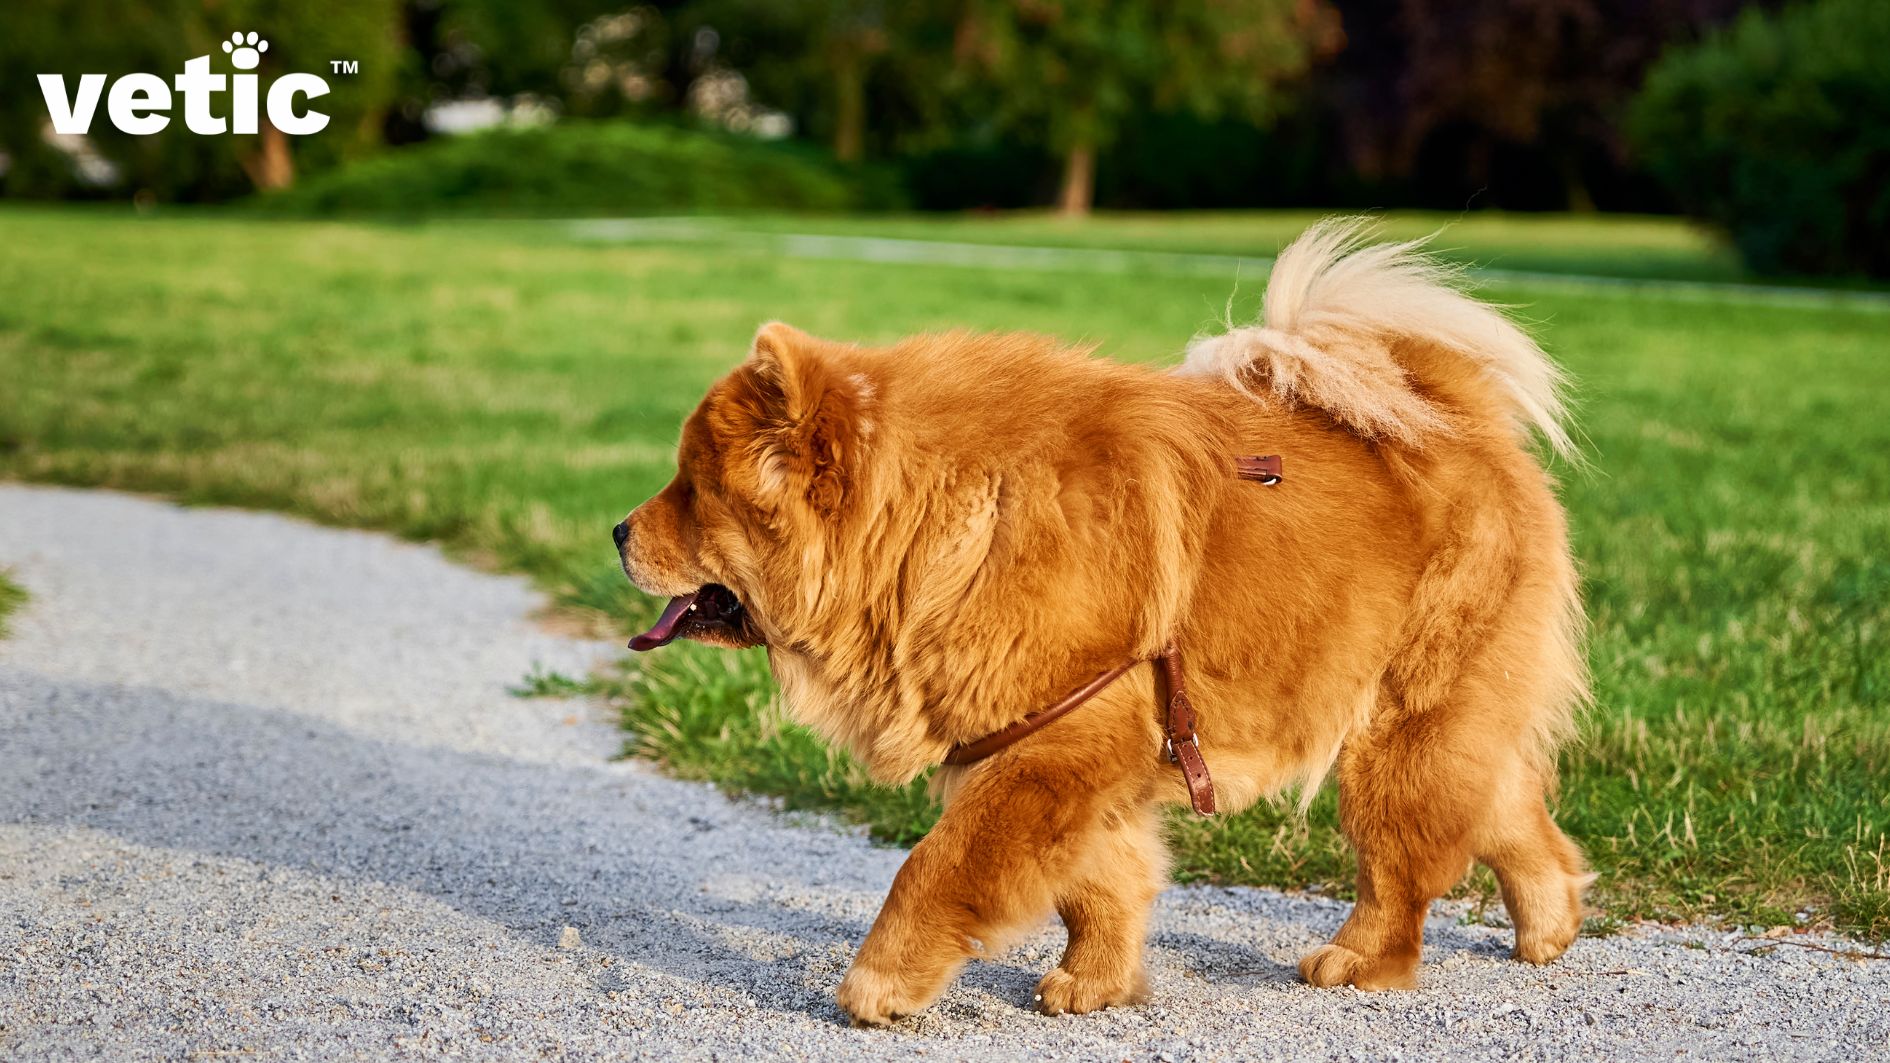 A chow chow wearing a leather harness walking on the gravel at a dog park. green grass and trees are visible in the background. it is the side profile of a chow chow.